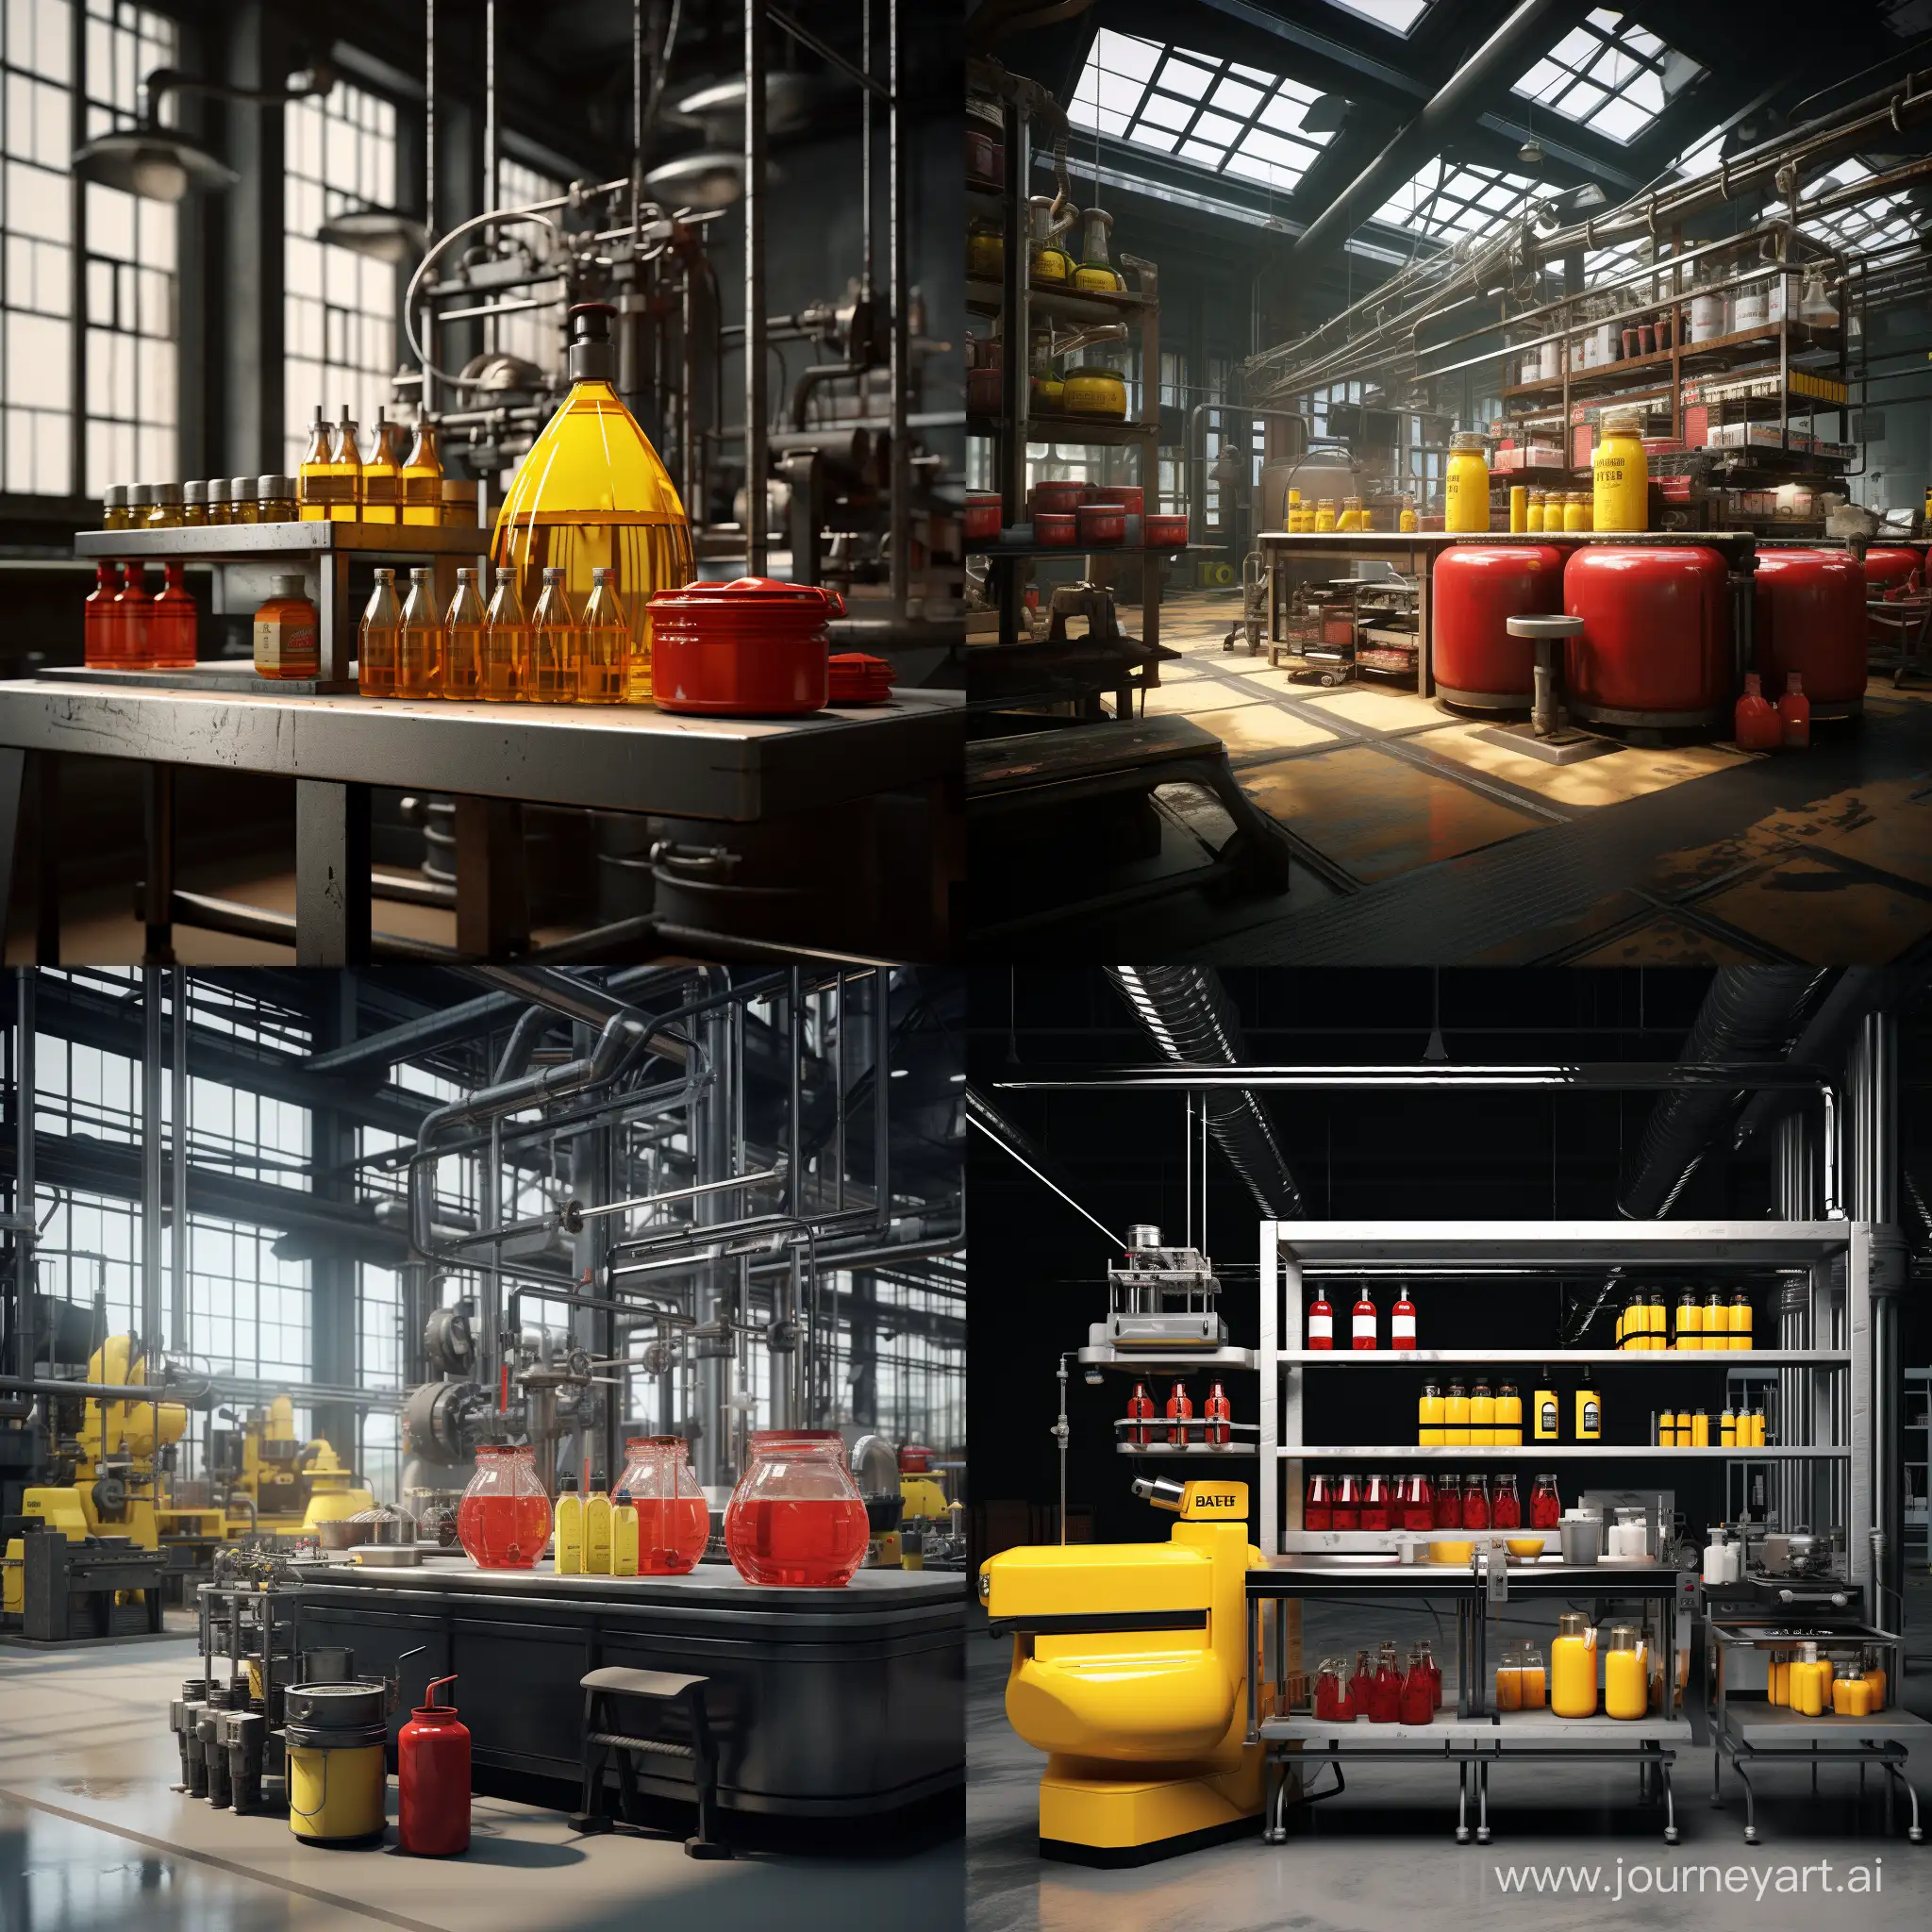 Industrial design style, Functional design associated with machinery and industry aesthetics (masterpiece, 8K, UHD, photo-realistic:1.4),(efficient machinery:1.3), (bottles of sauces and ketchup:1.2), (glistening tomatoes:1.1), (industrial workshop setting:1.1), (vibrant reds and yellows:1.1), (meticulous details:1.2), (high-quality food production:1.2), (warm colours, inviting atmosphere:1.1), (intricate lighting:1.1)